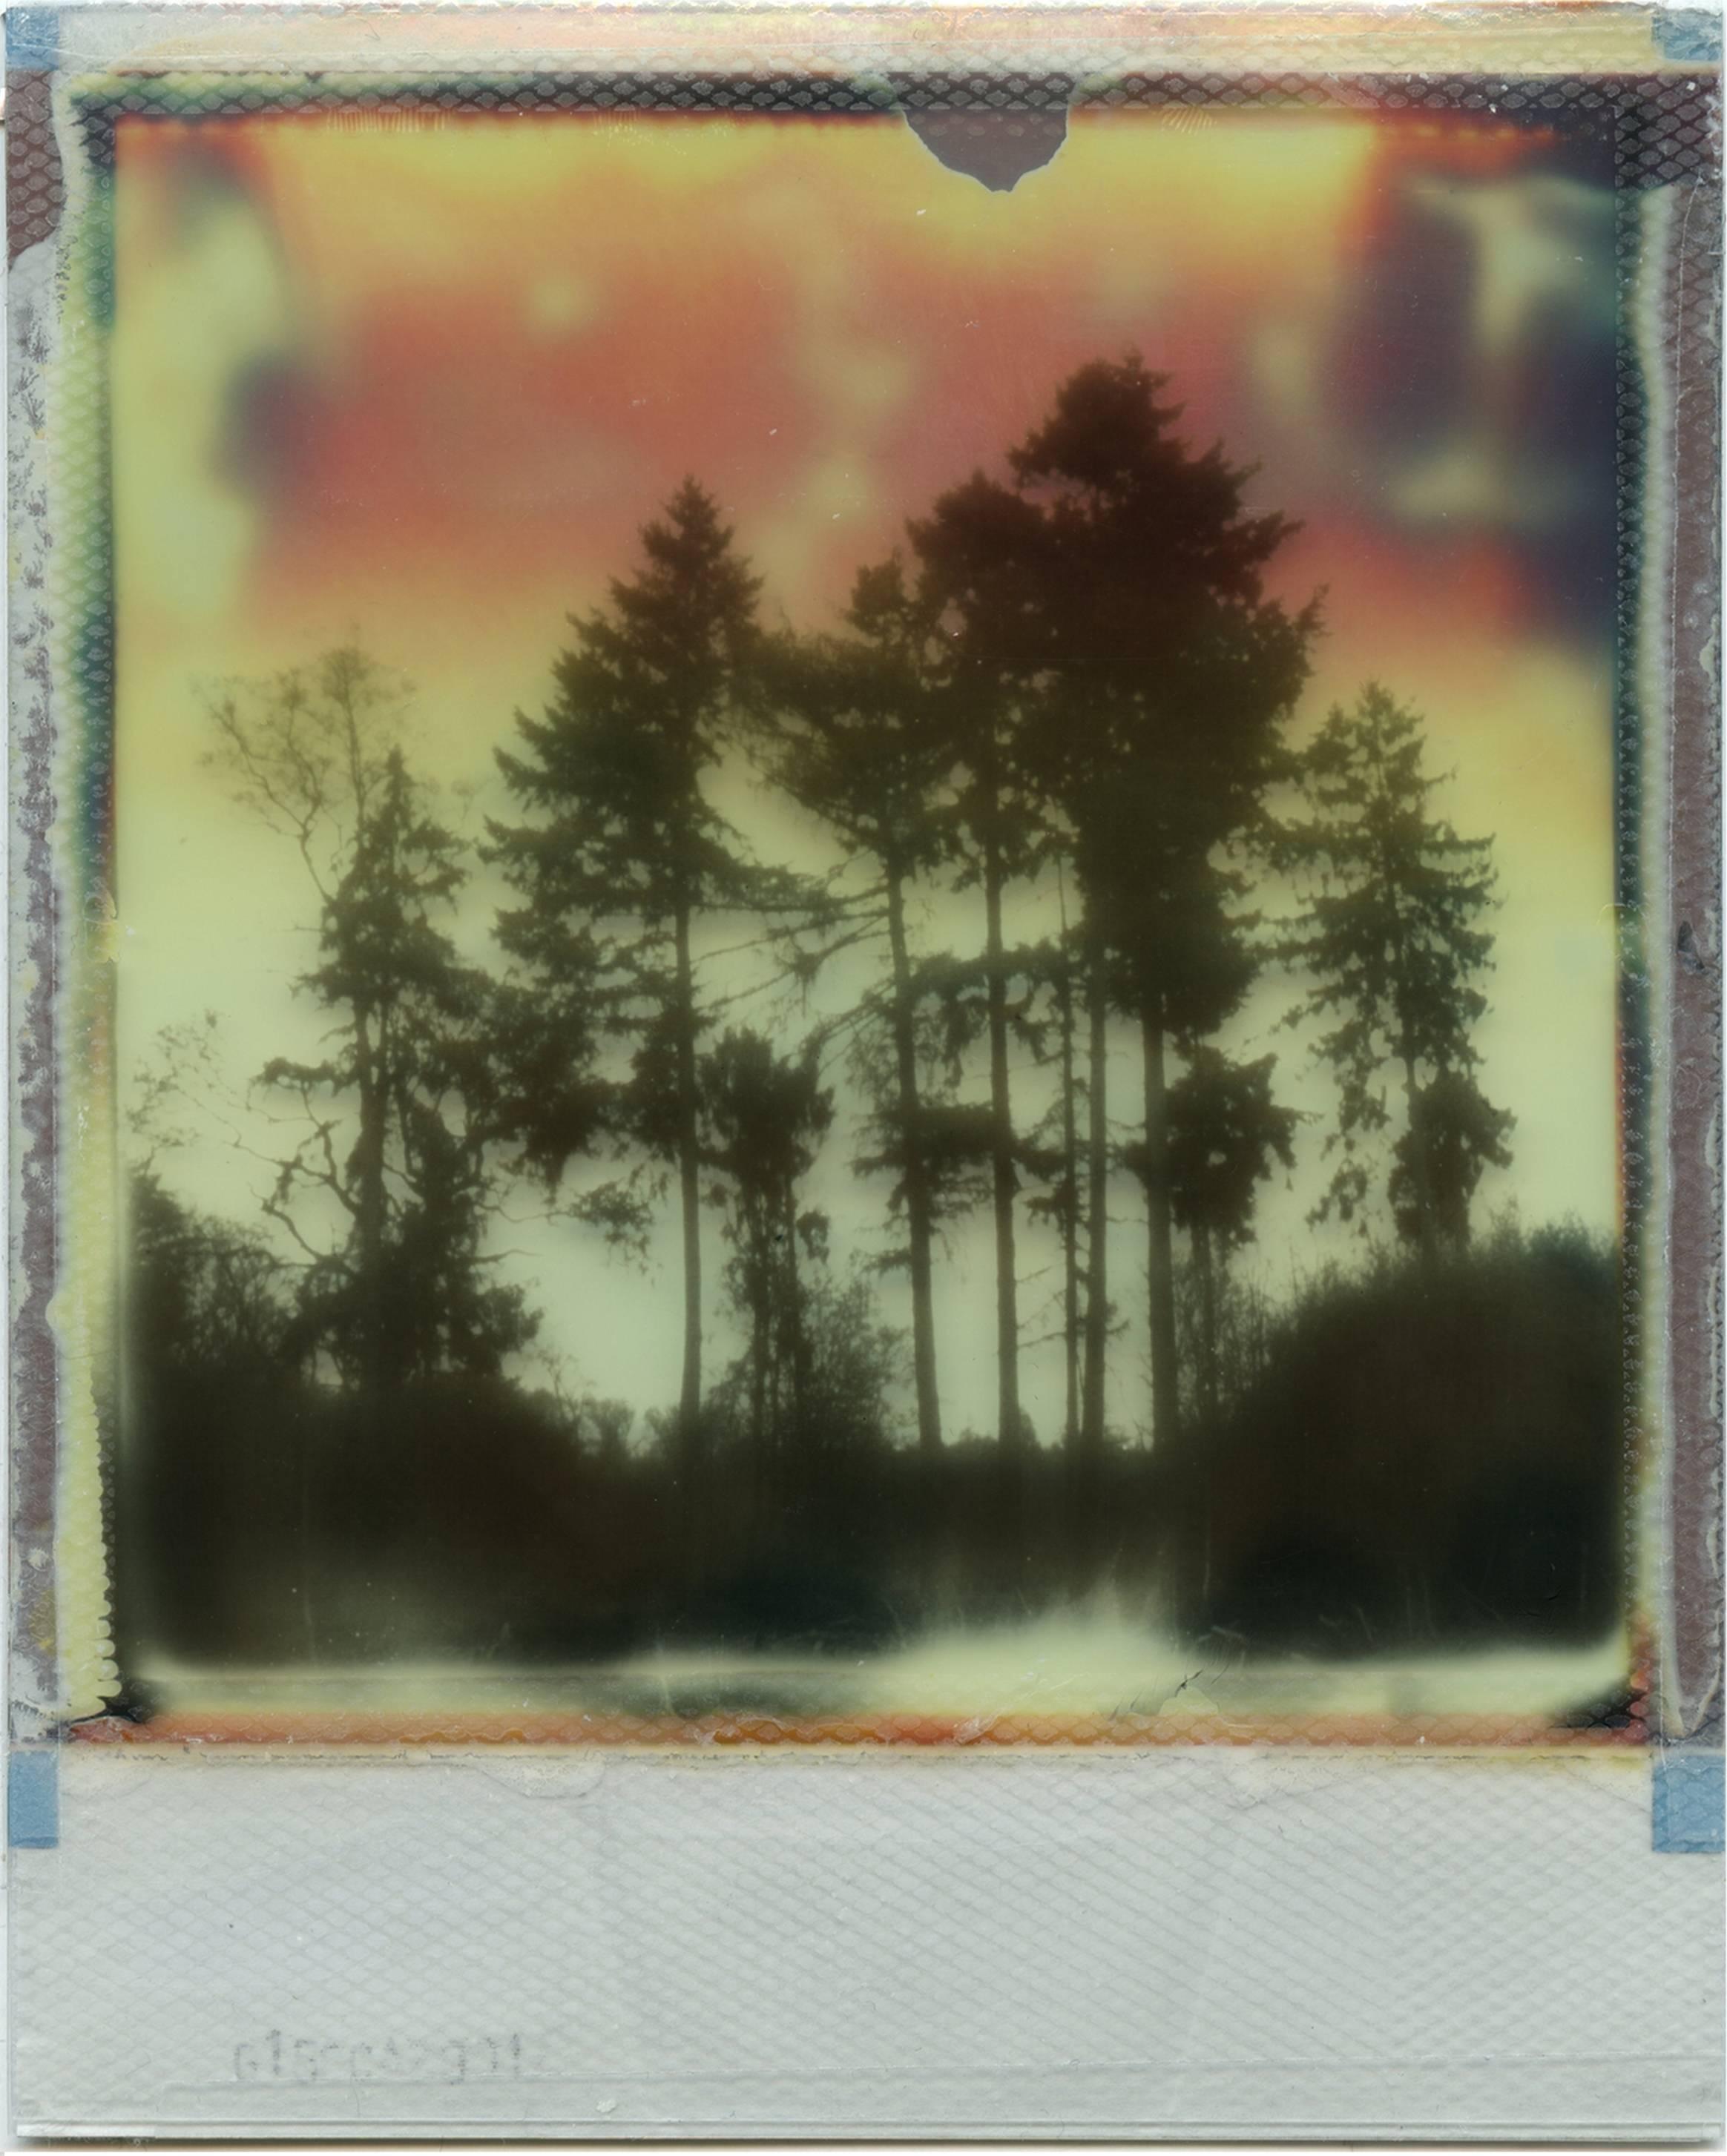 'Where My Heart Belongs I’, 2017, 20 x 32 cm, Edition 2/10, Digital C-Print based on a Polaroid Diptych, not mounted. Numbered and signed on the back by the artist.

Artist Statement
“Since my childhood days I always loved taking photos, but for